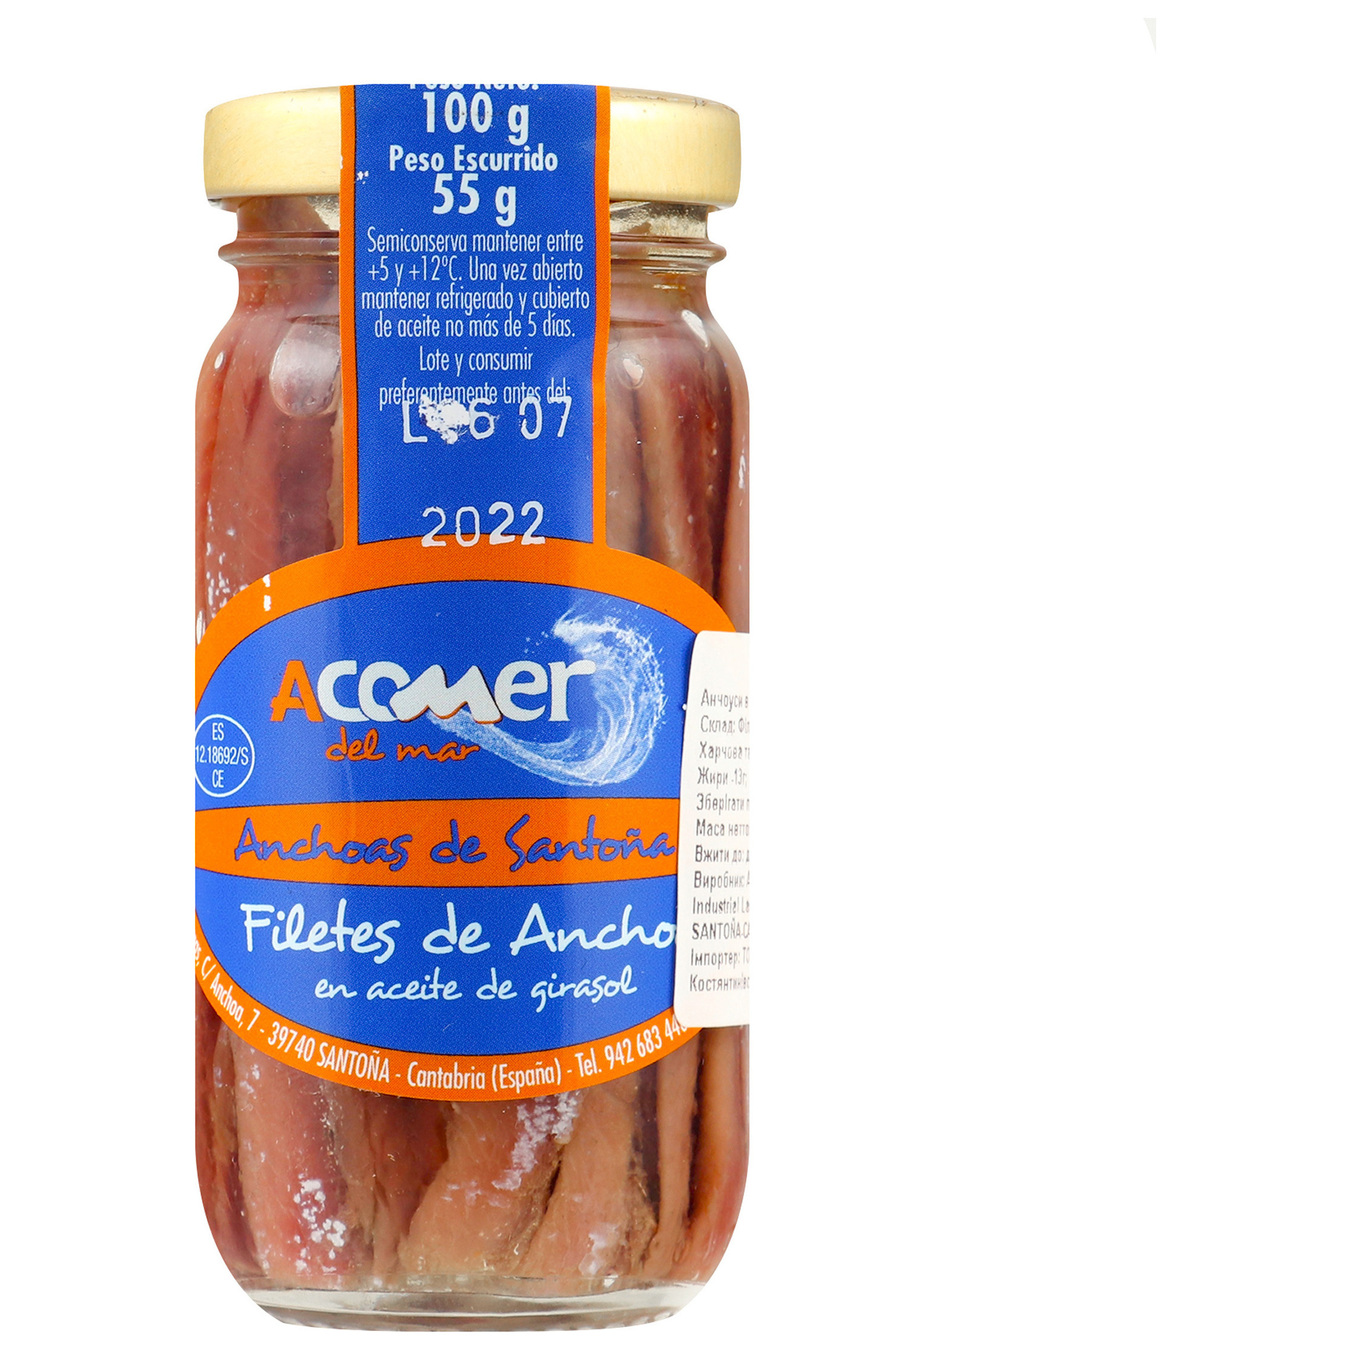 Acomer del Mar In Sunflower Oil Anchovies 100g